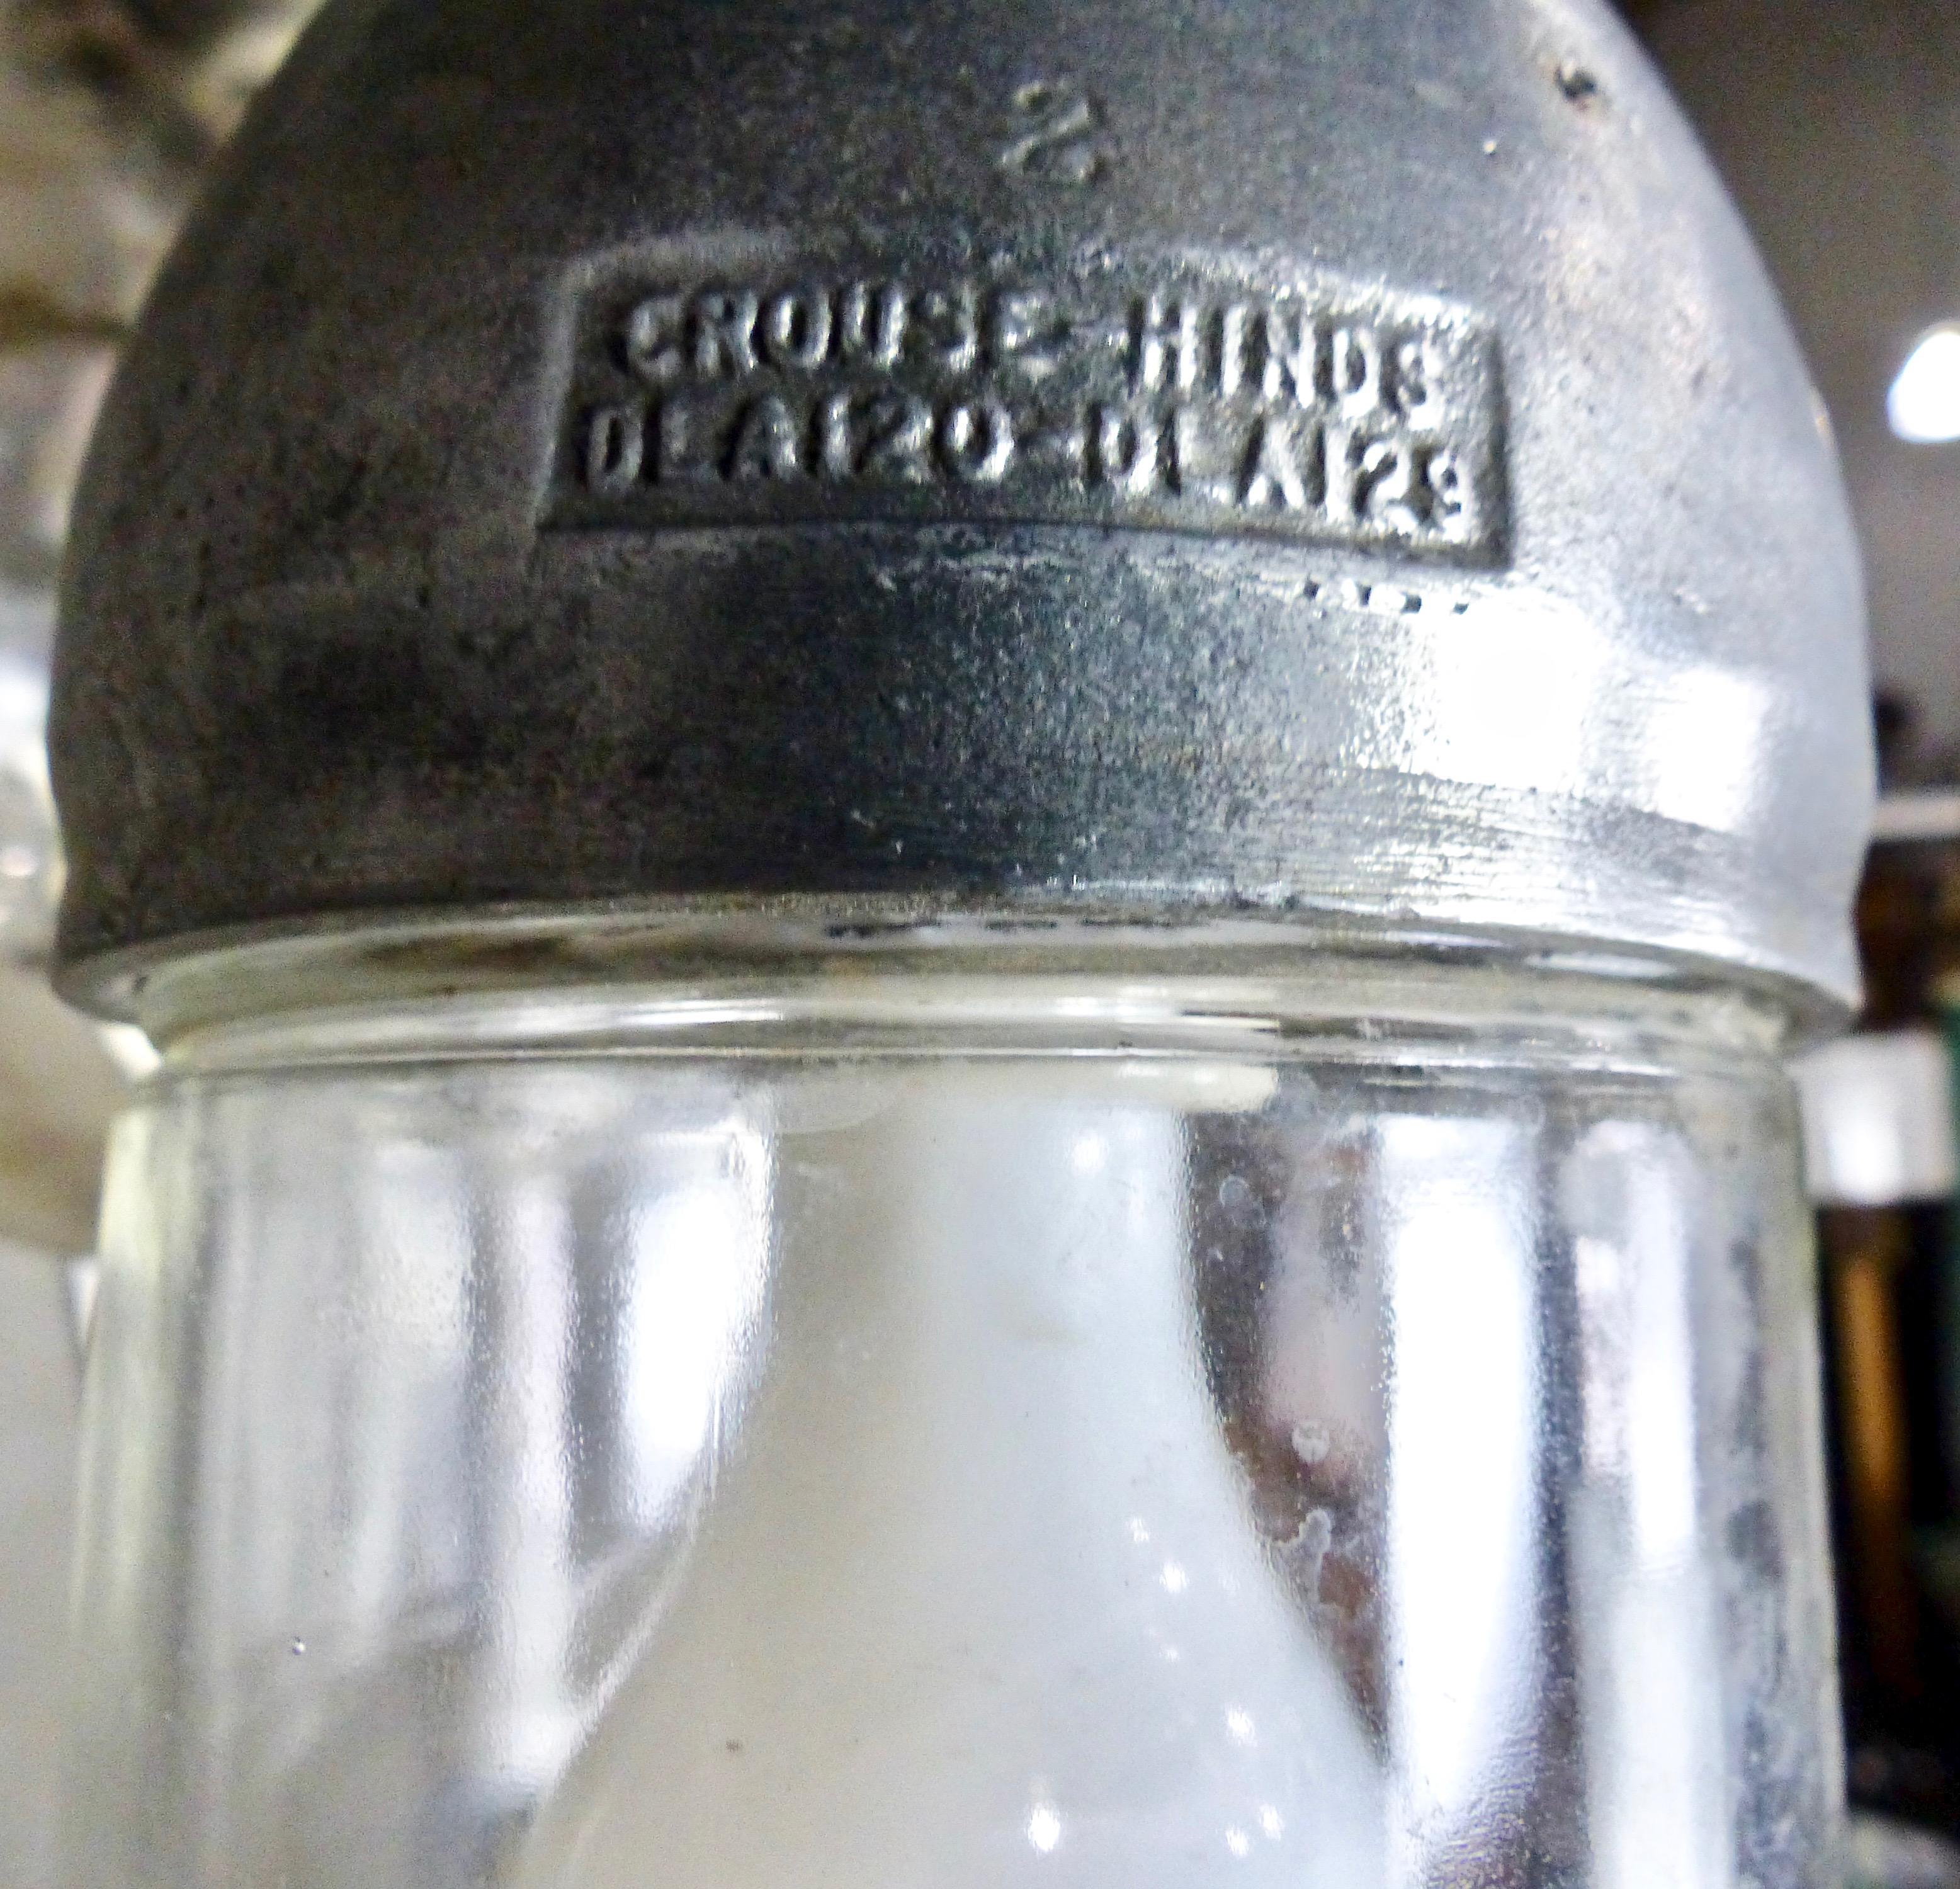 Authentic and instantly recognizable Crouse Hinds industrial/factory pendants, circa 1930. Nearly 100 years old, and still on trend. Signed cast metal housings with ‘teardrop’ shaped glass globes. Re-wired and approved to current electrical